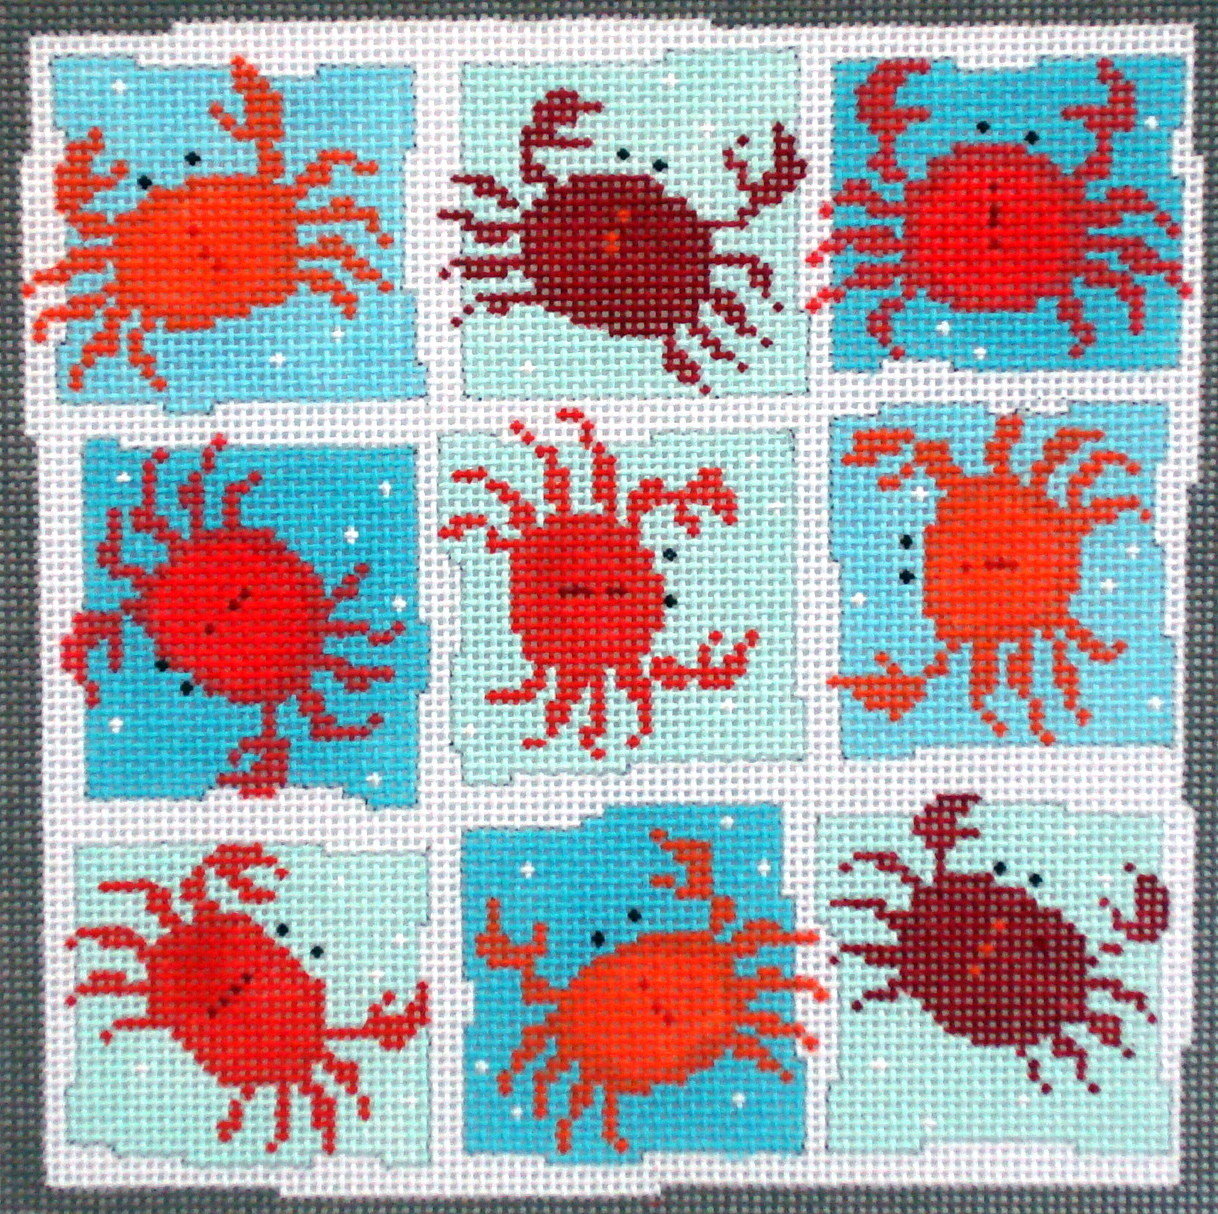 Crabs Nines   (handpainted needlepoint canvas)*Product may take longer than usual to arrive*